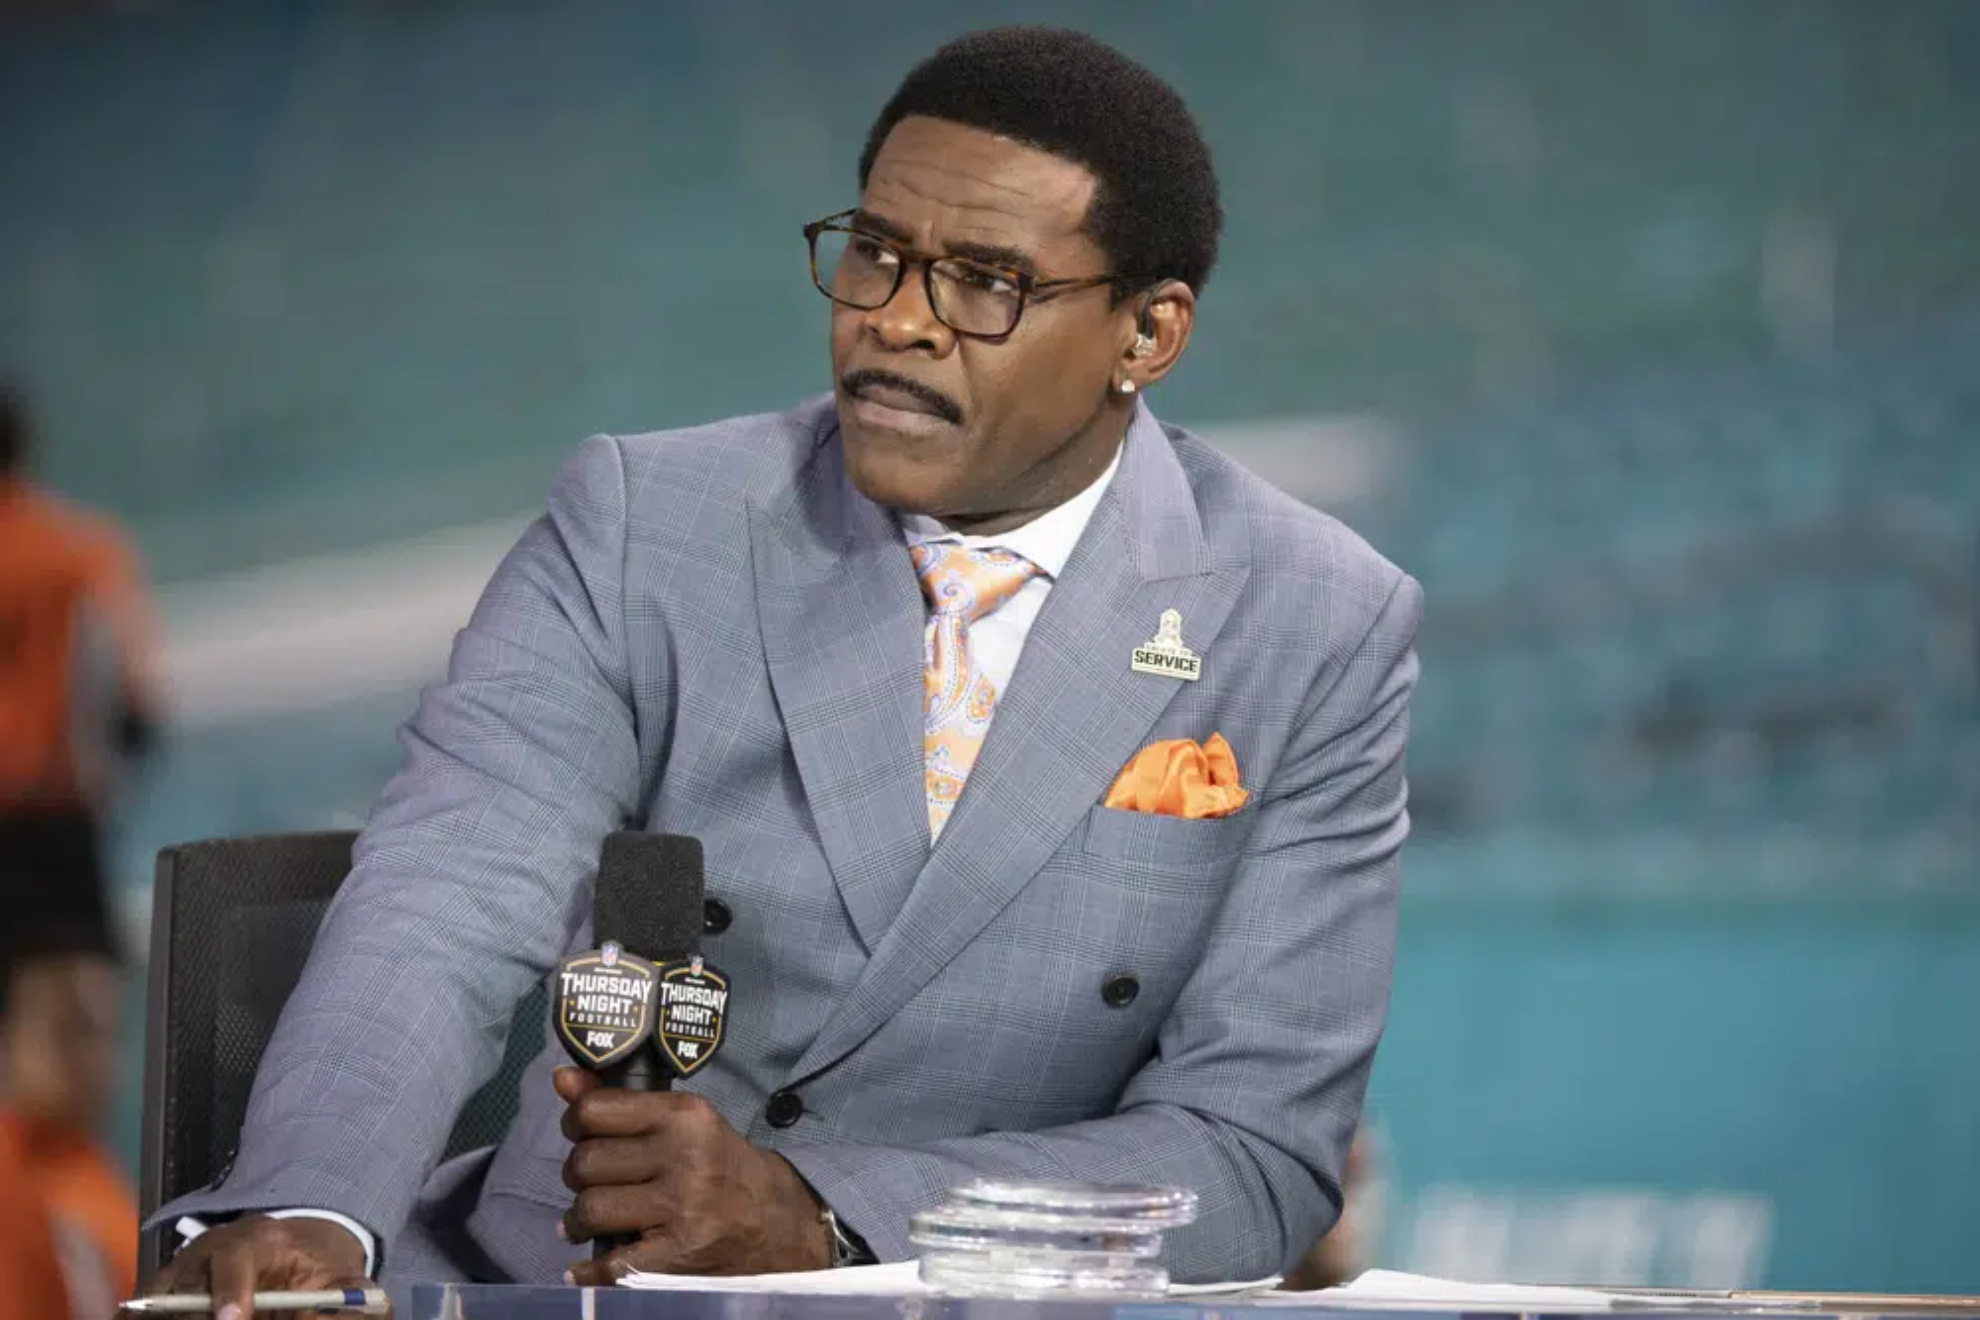 Michael Irvin is suing Marriot for $100 million.